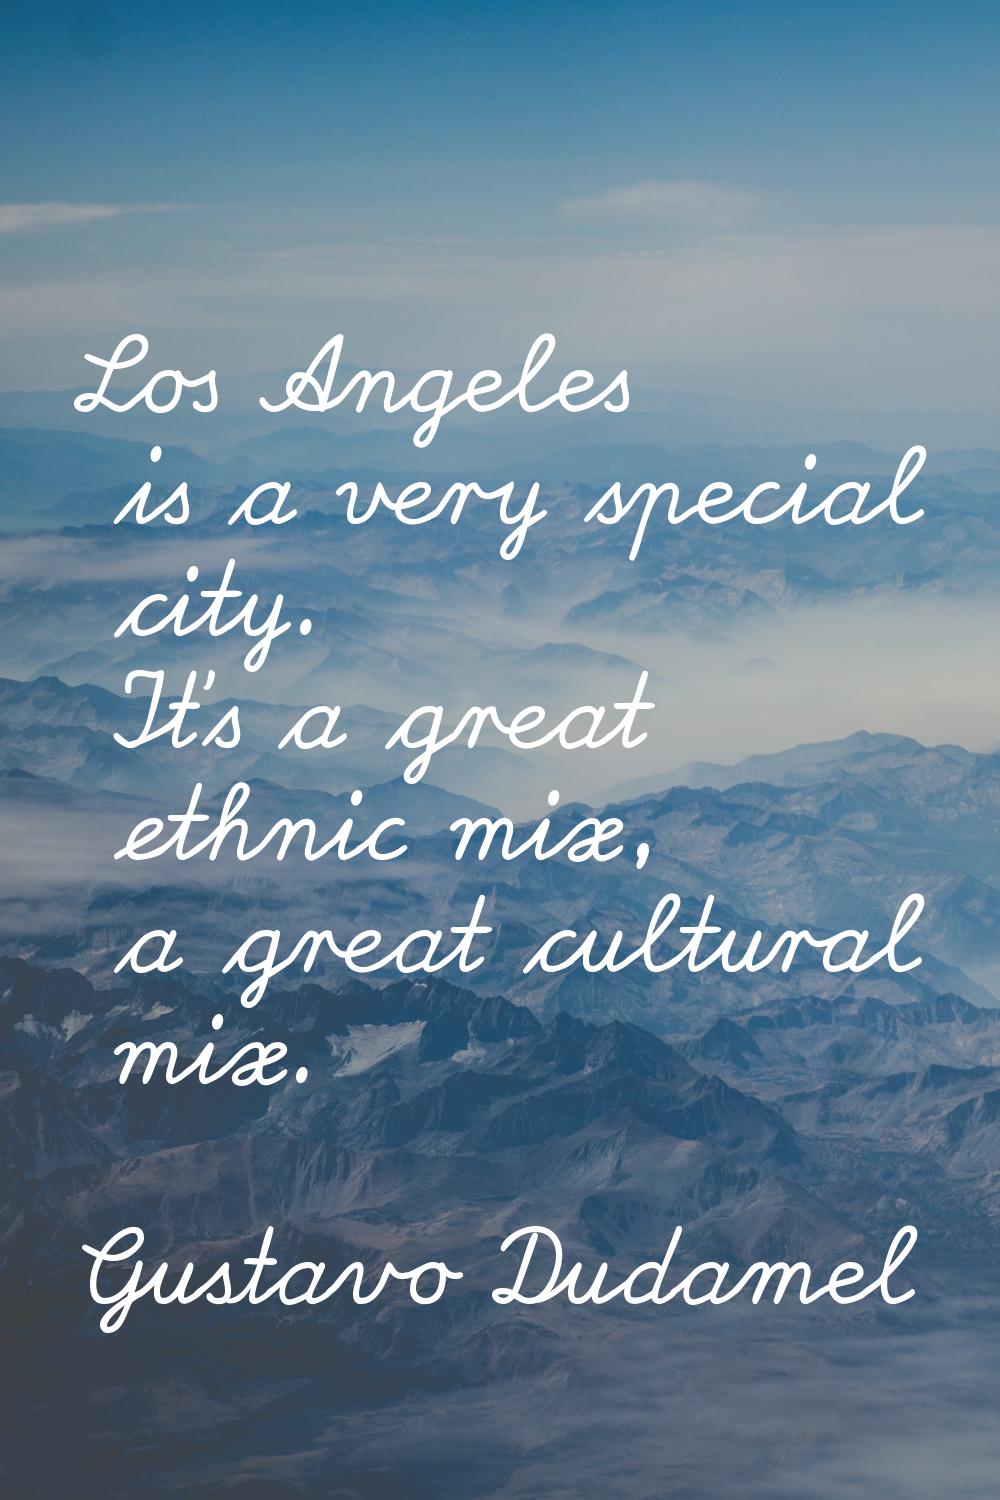 Los Angeles is a very special city. It's a great ethnic mix, a great cultural mix.